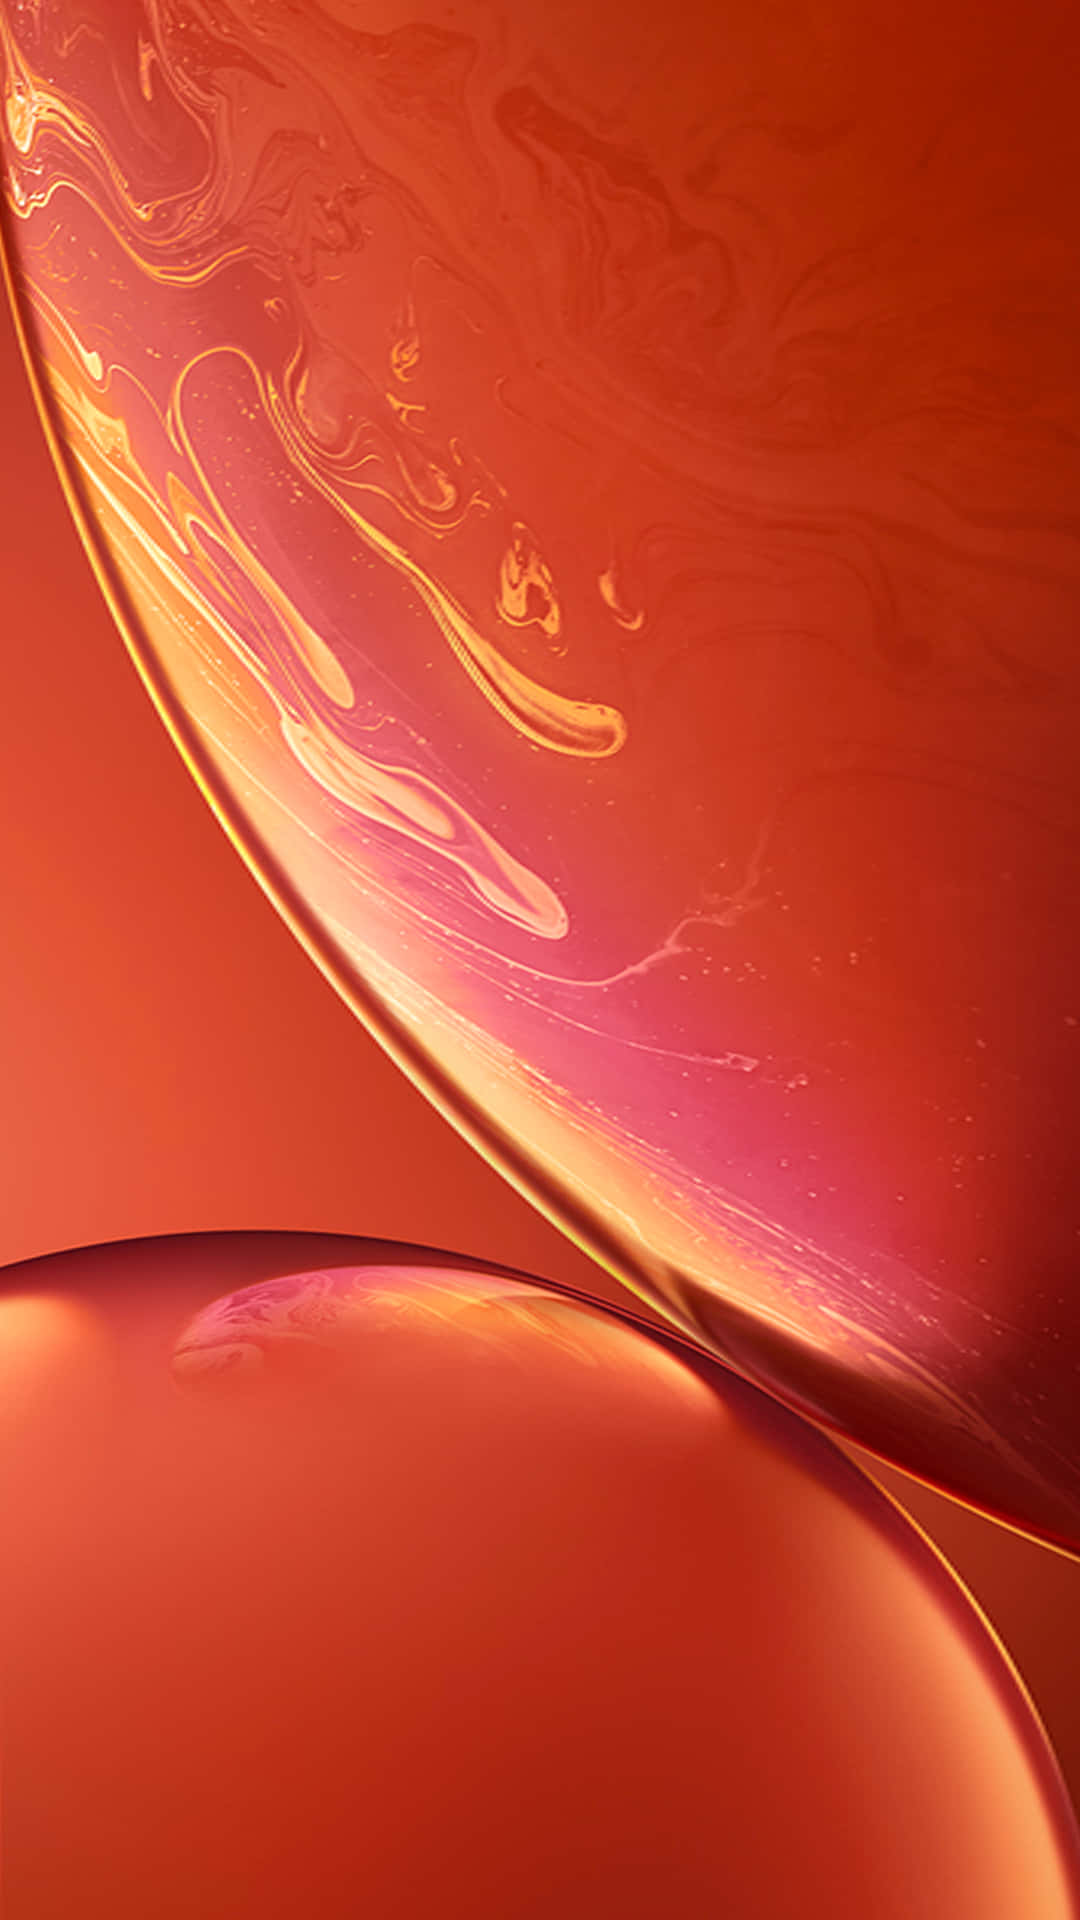 Iphone Xr Stock Coral Red Bubbles Wallpaper